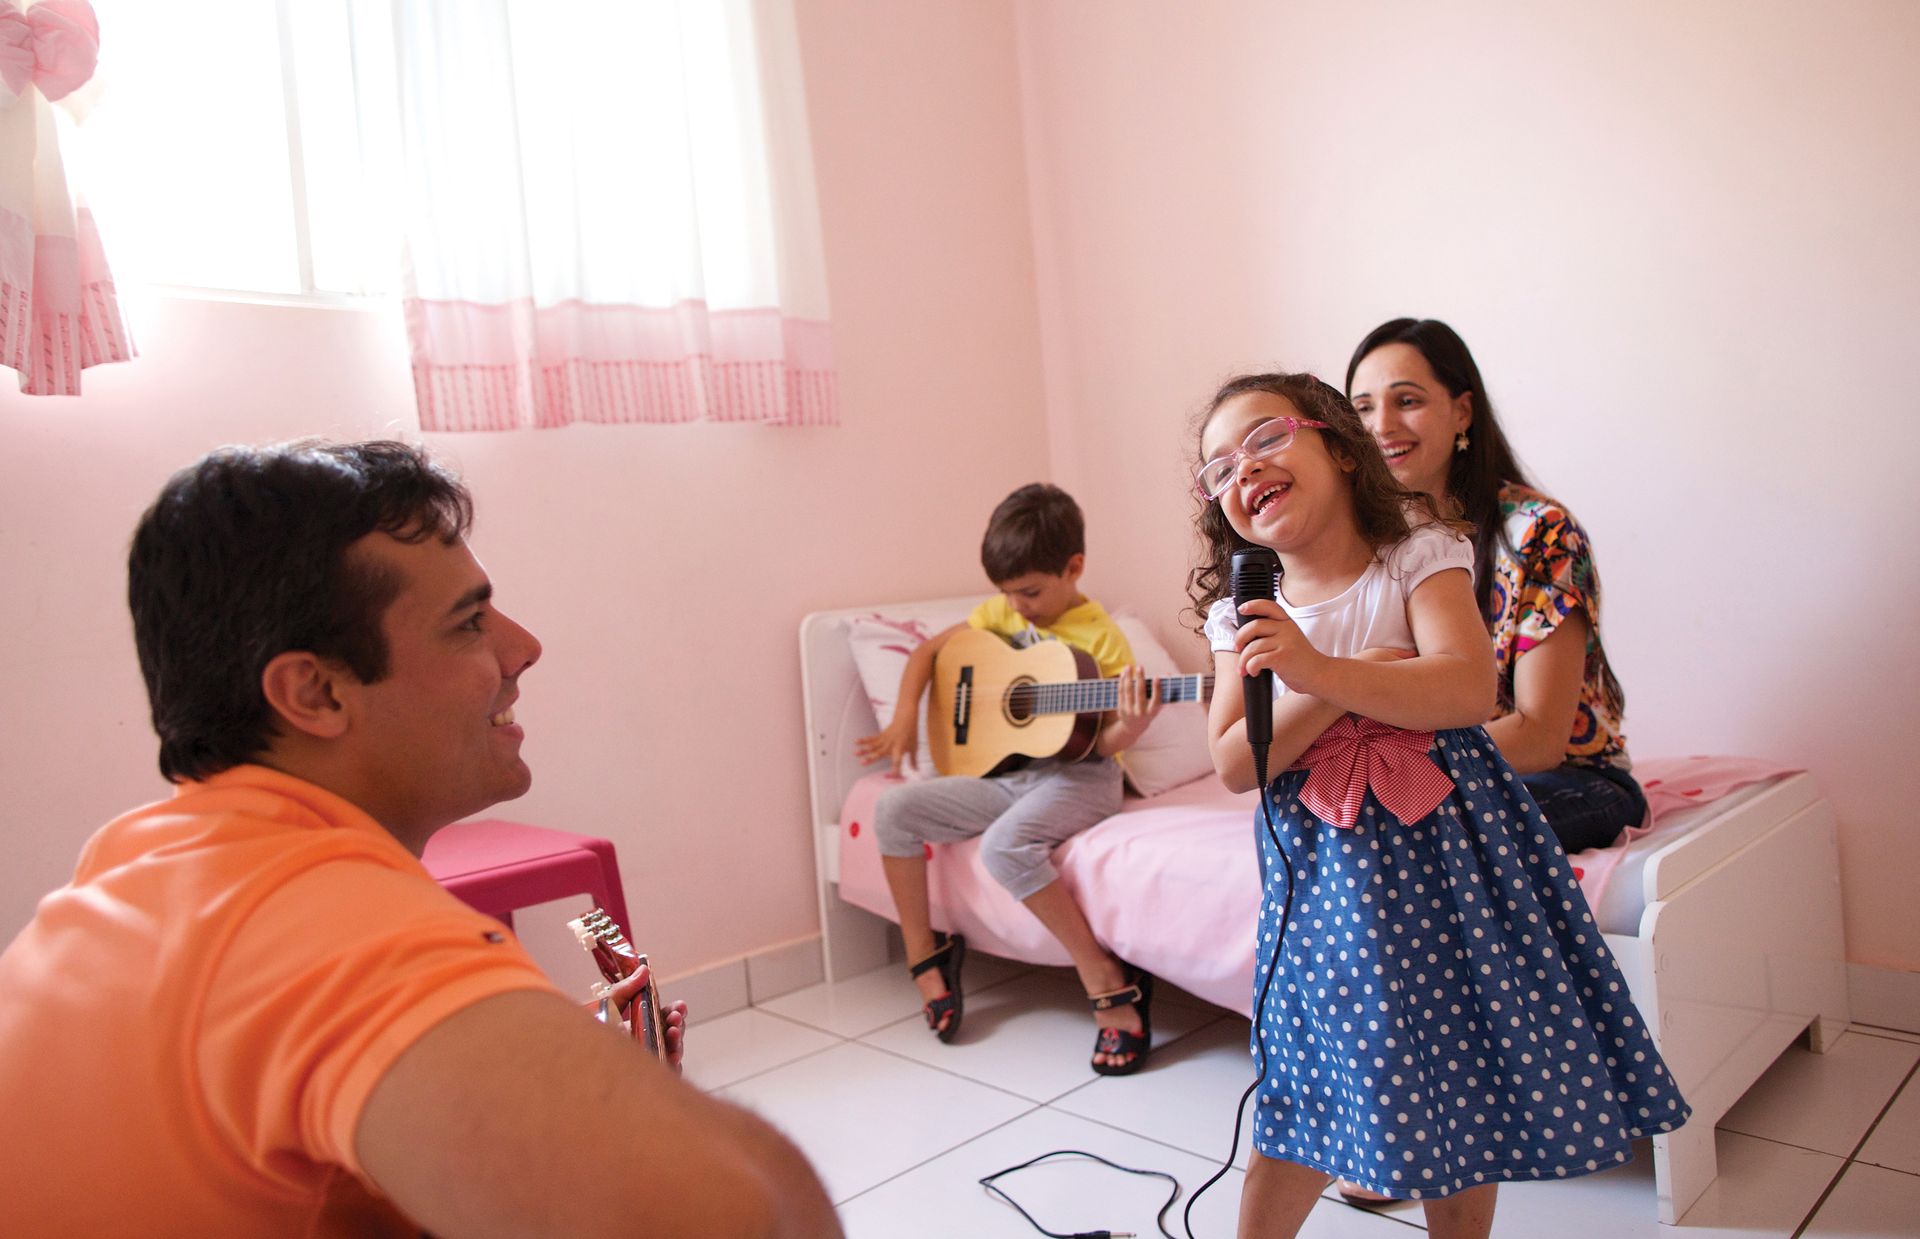 Murilo and Kelly Ribeiro enjoy spending time with their children. Their daughter sings, while Murilo and his son accompany her on guitar.